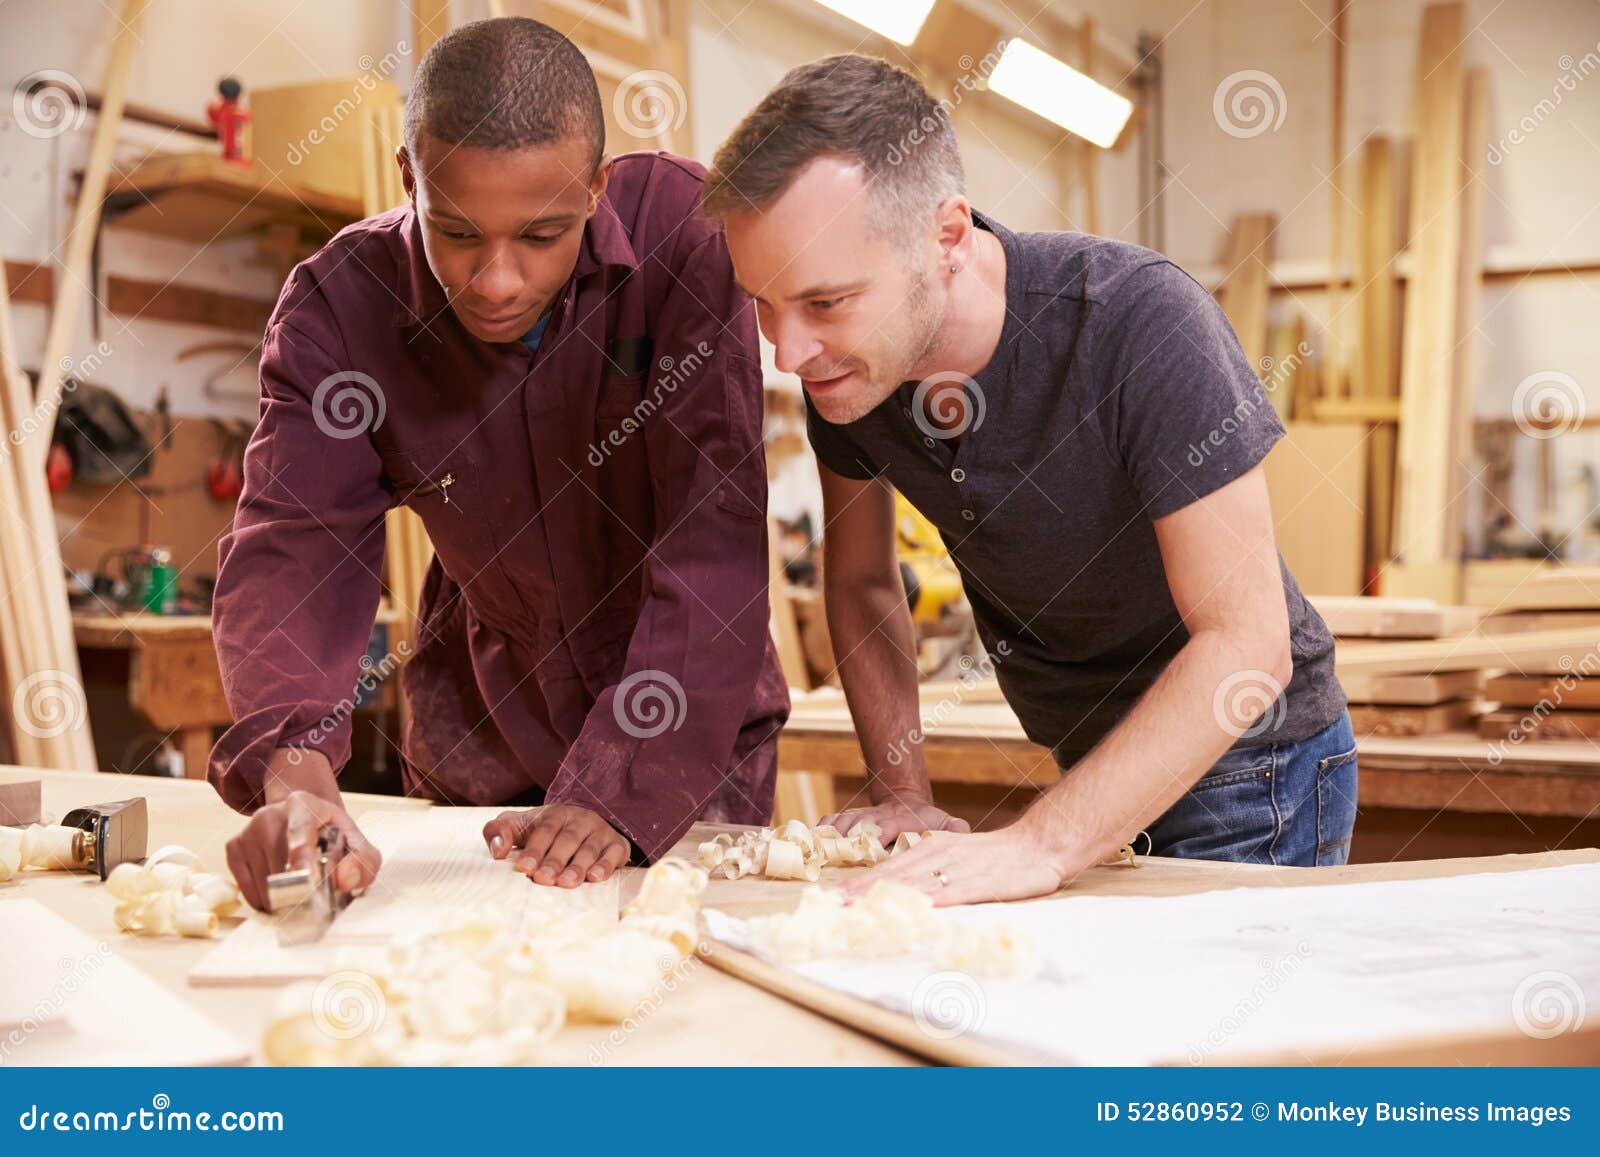 Carpenter With Apprentice Planing Wood In Workshop Stock ...